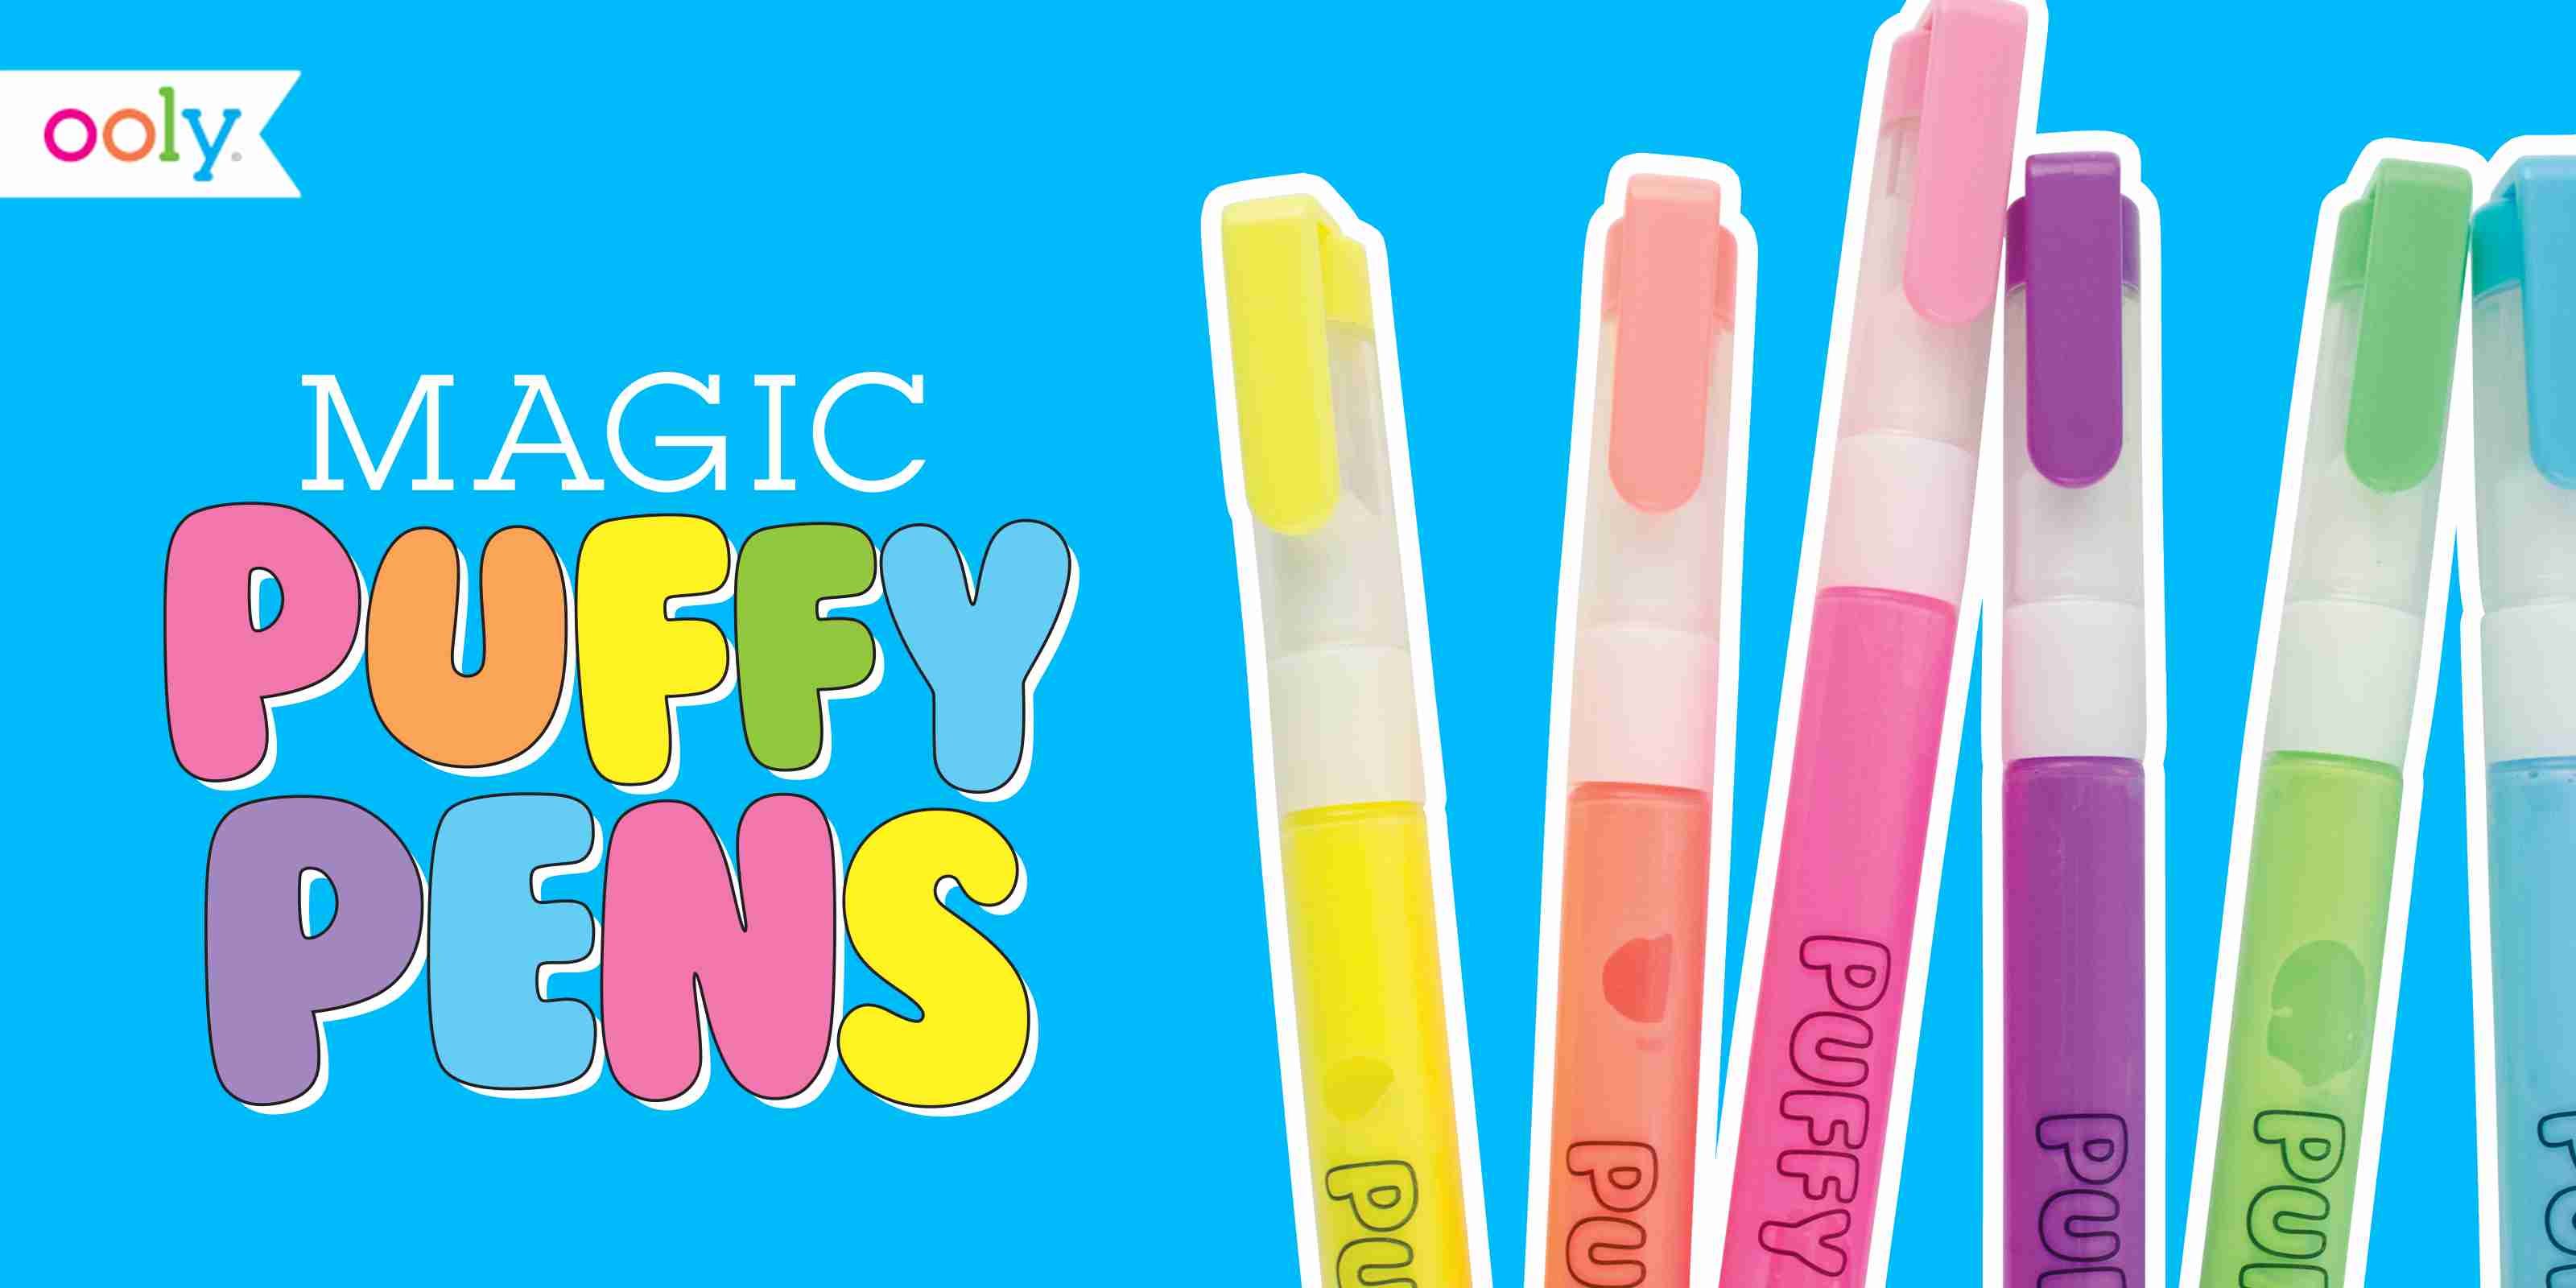 Magic puffy pens, Why am I only just discovering 'Puffy Pens'? 🤯, By  UNILAD